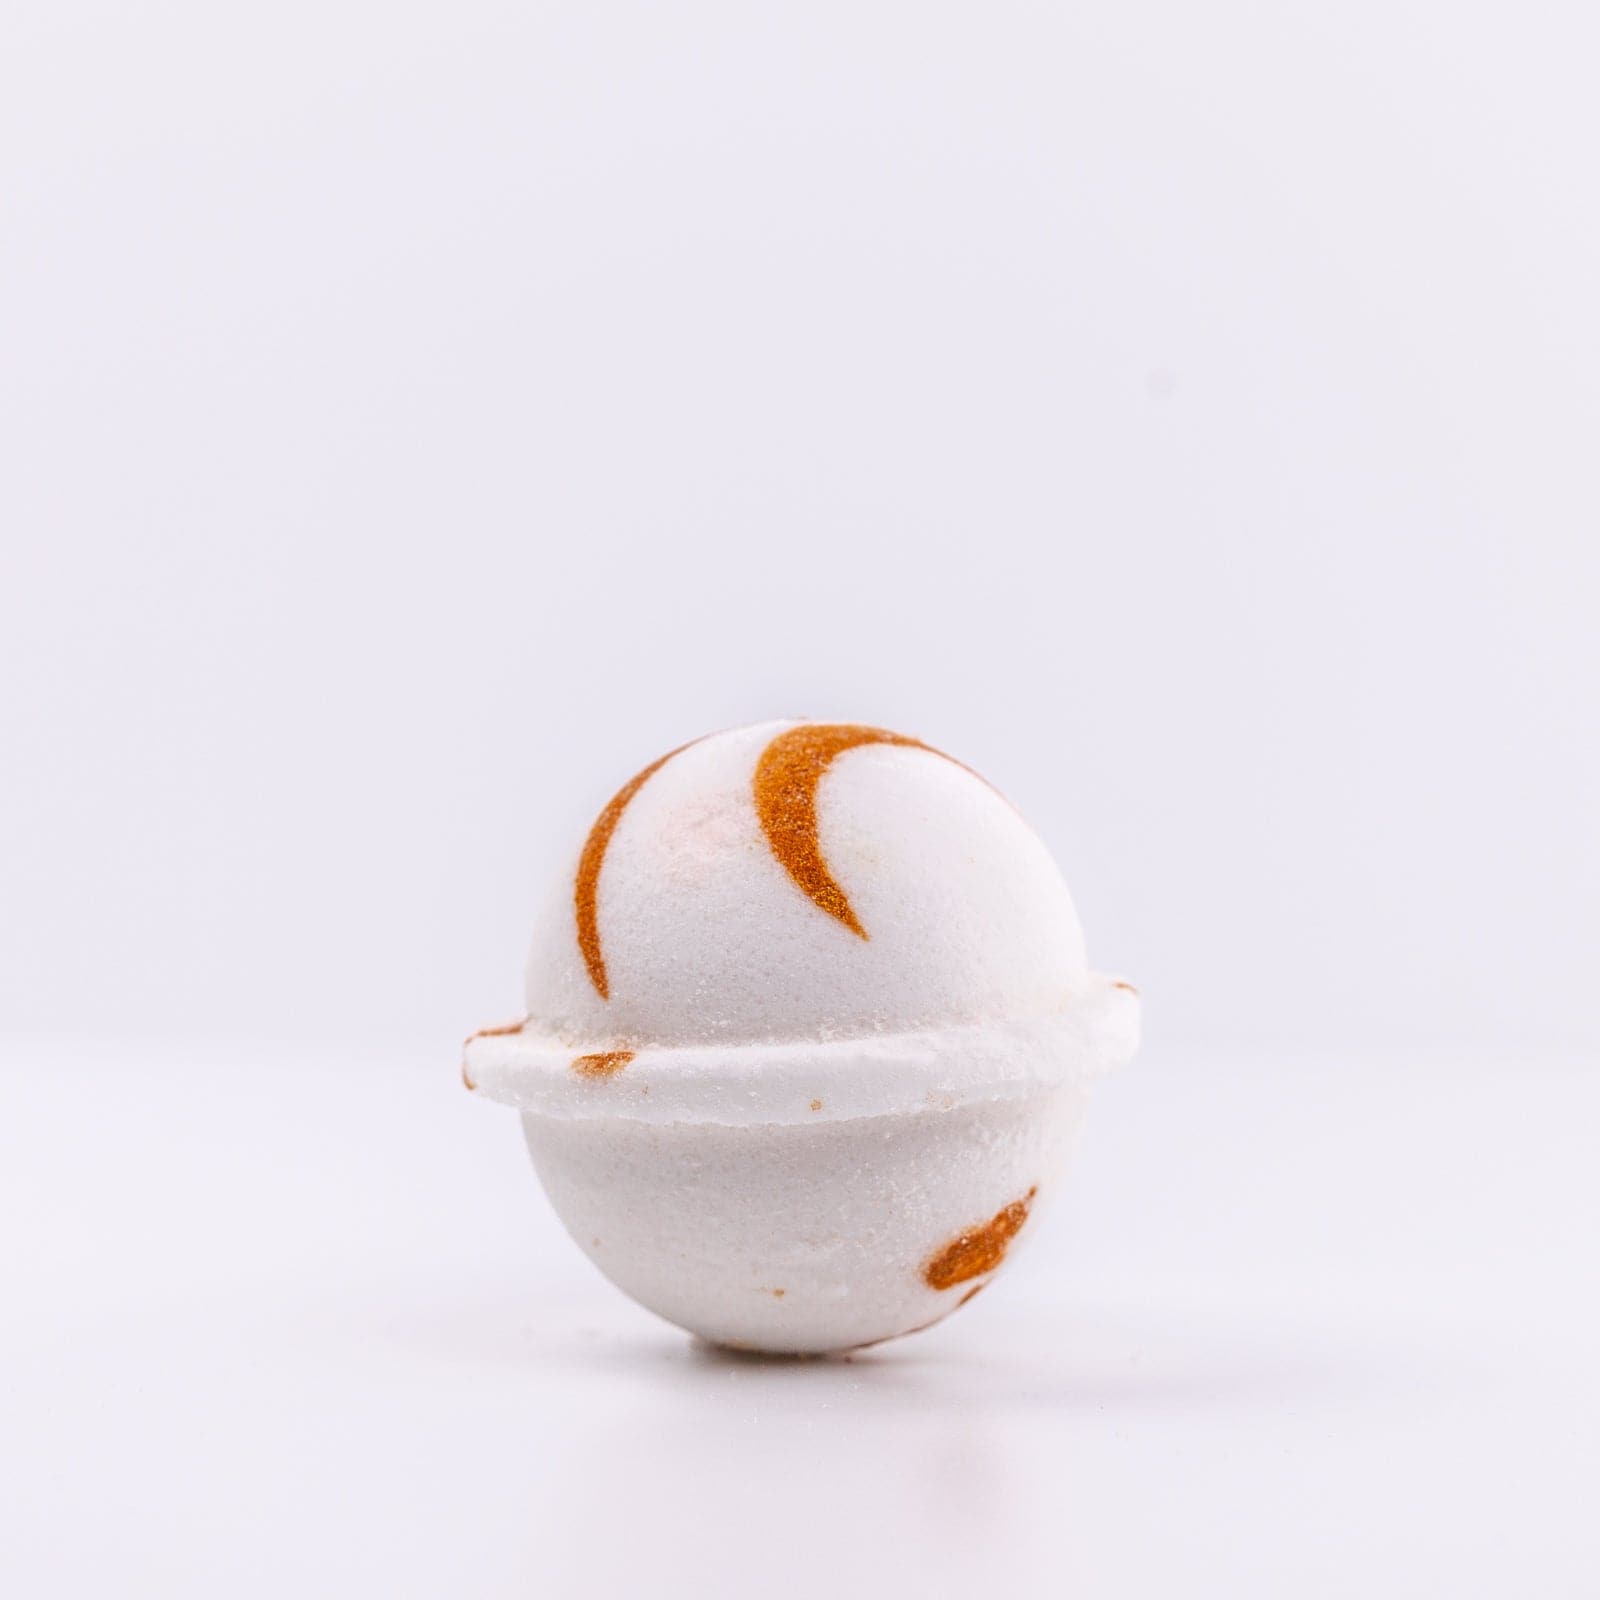 a white Narcissist Bath Bomb, with caramel design, placed upright